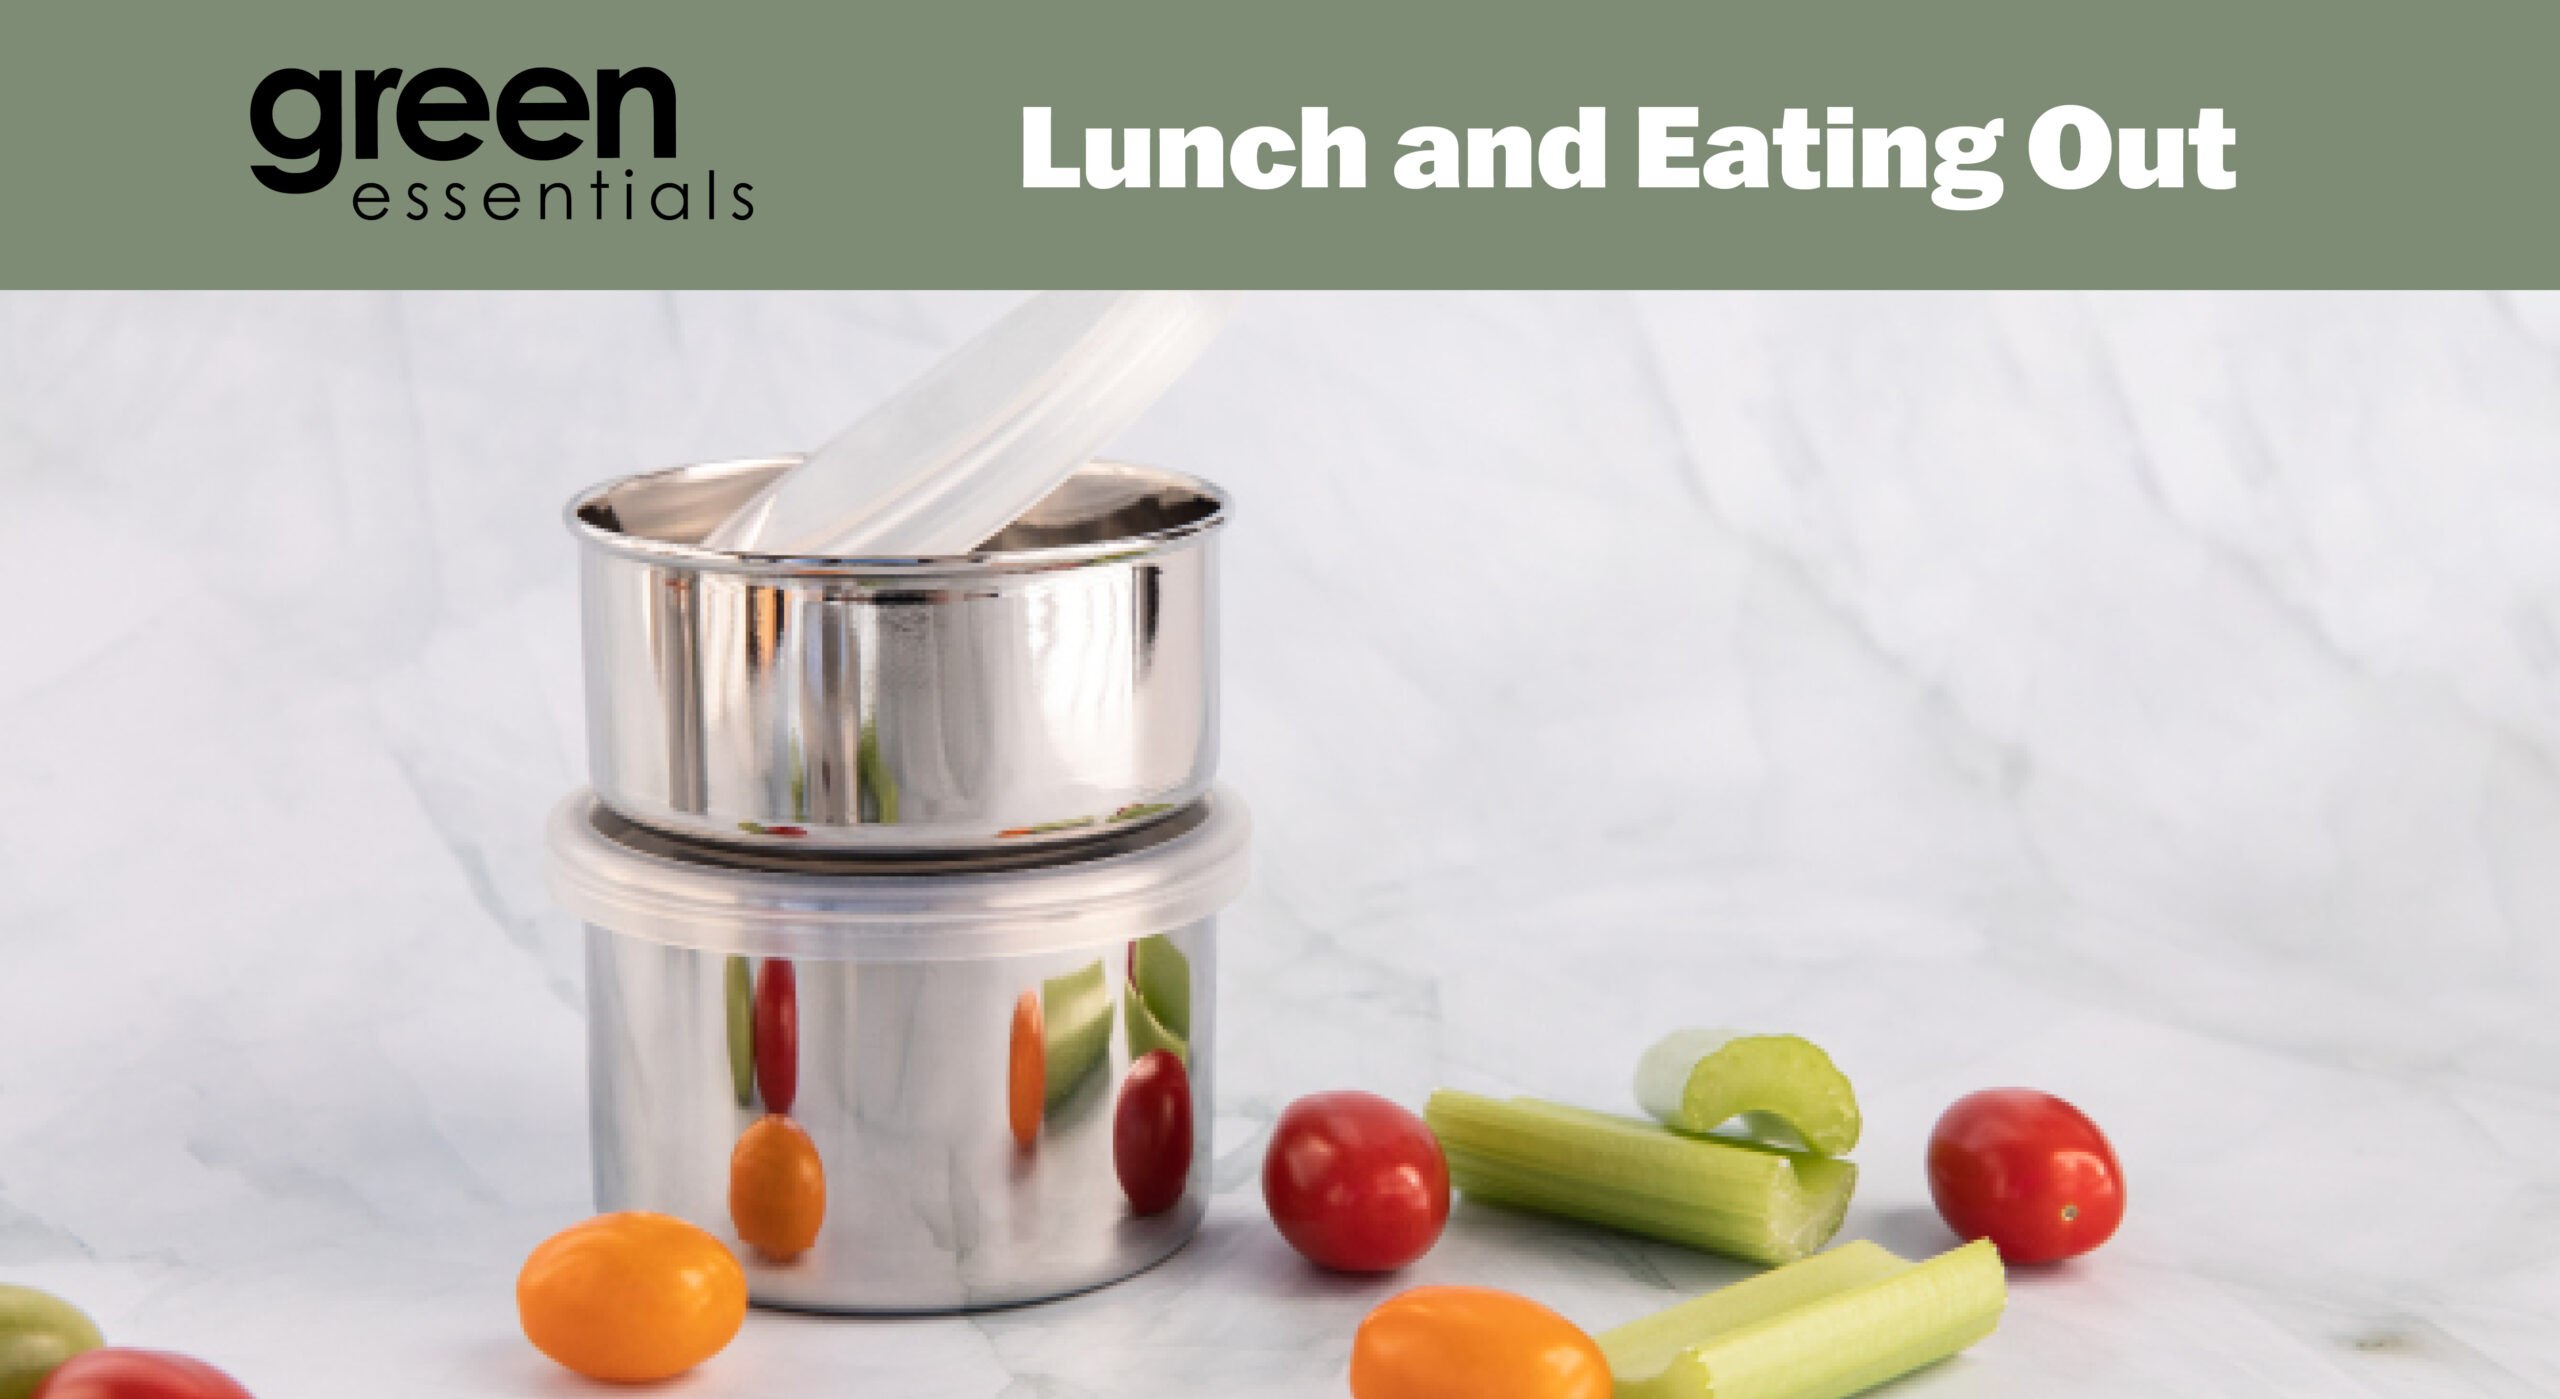 LUNCH AND EATING OUT - PRODUCTS BY GREEN ESSENTIALS